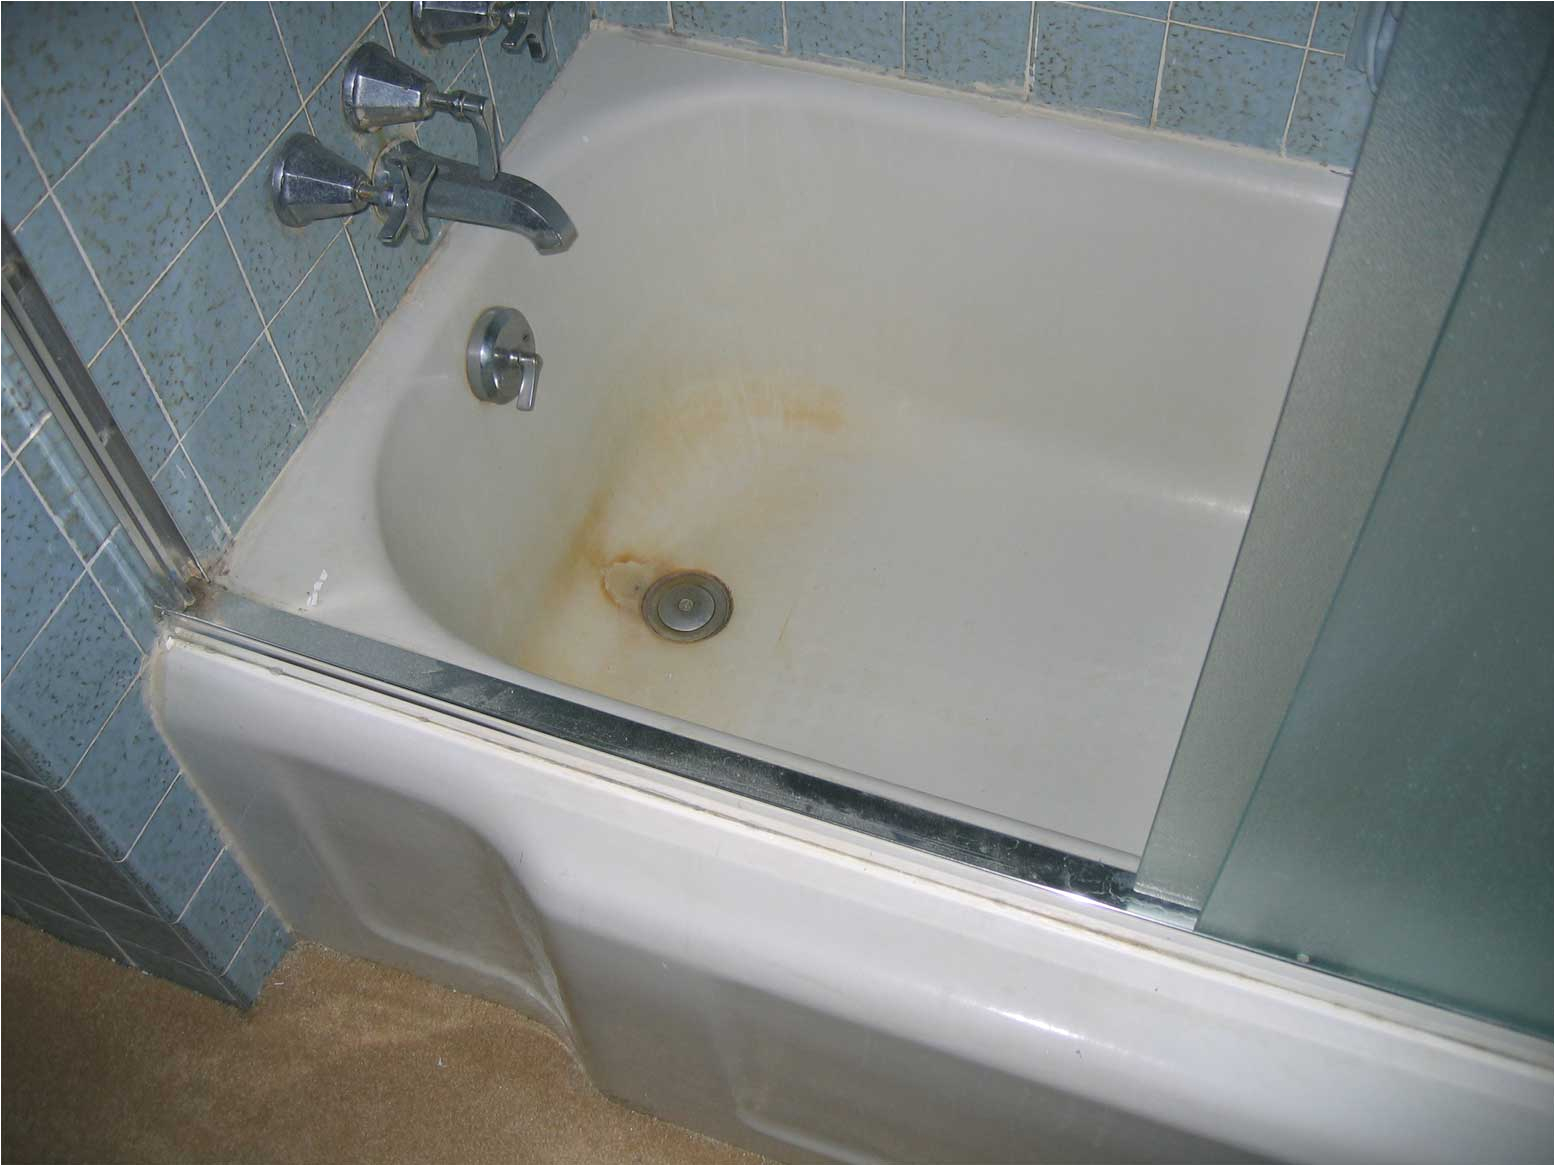 Bathtub Liner Replacement How Much for Bathtub Liners Cost theydesign